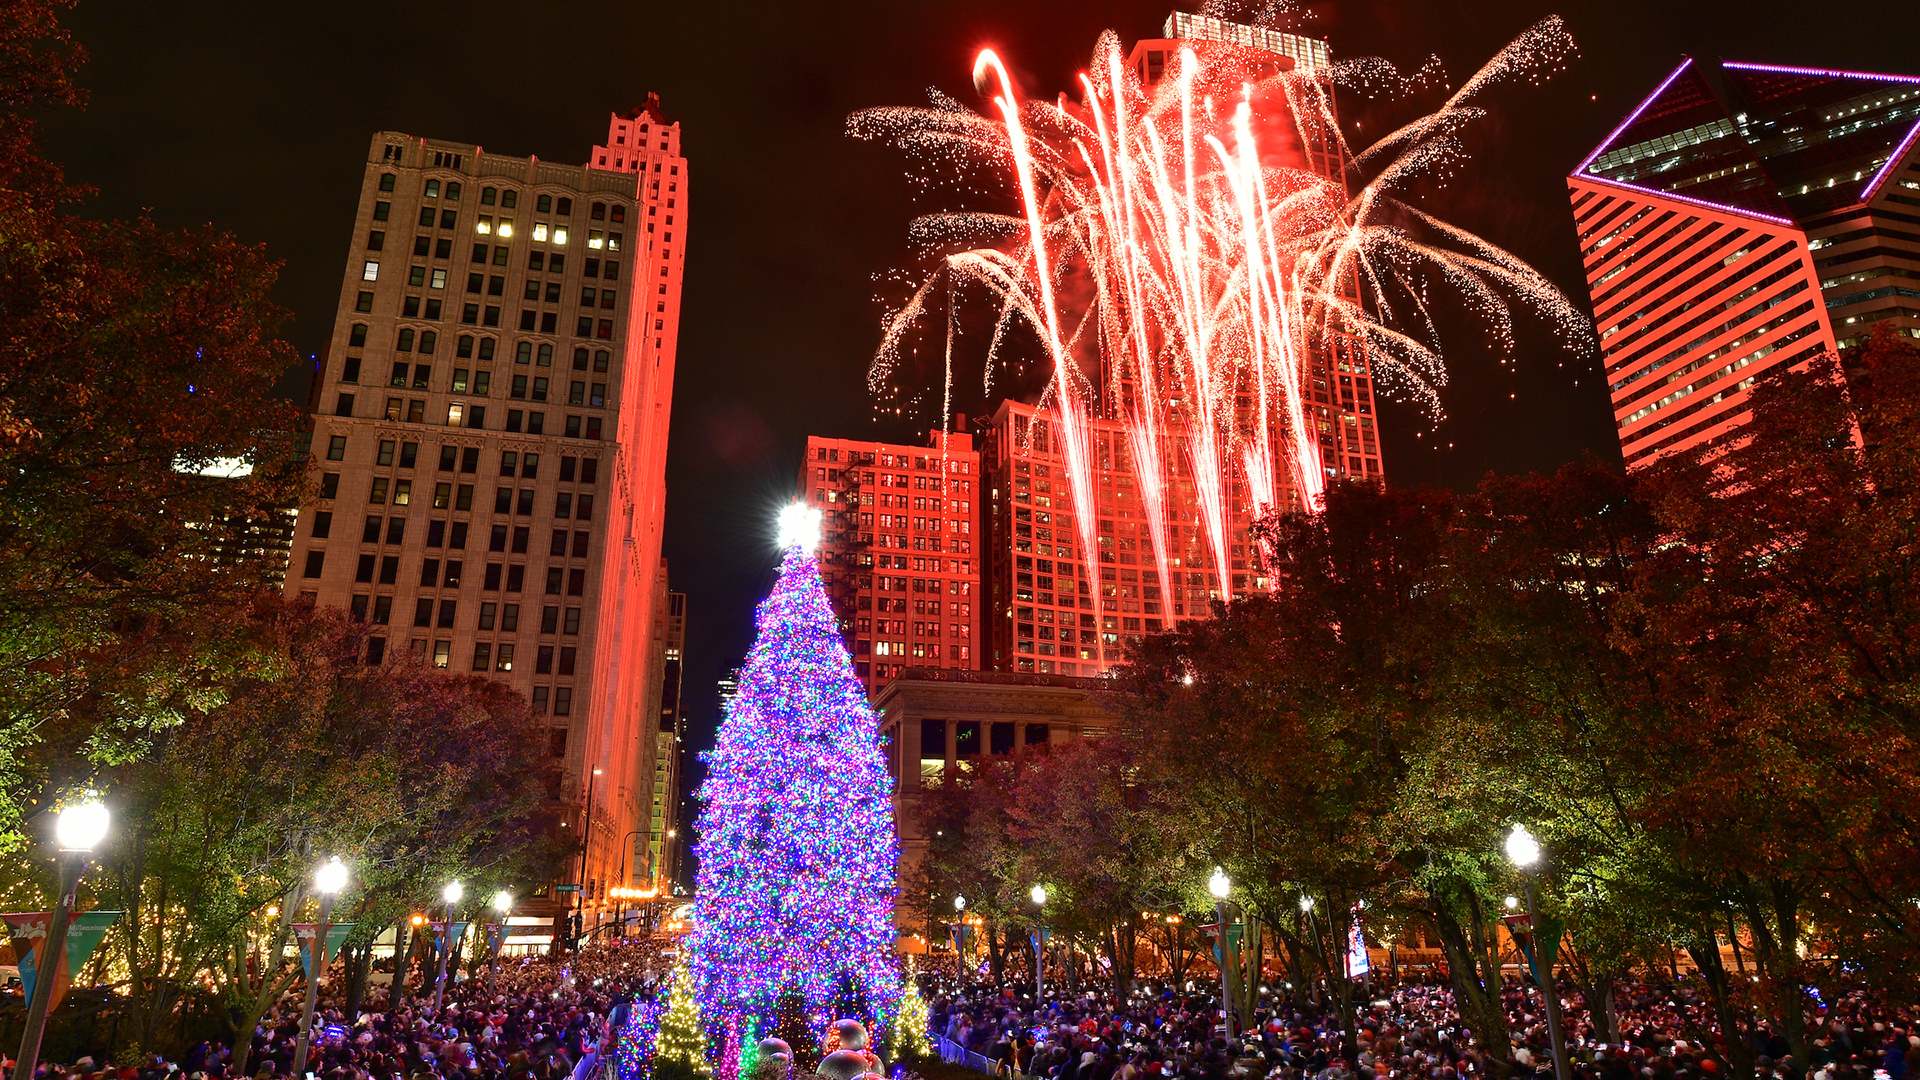 Best Spots for Christmas Lights in Chicago